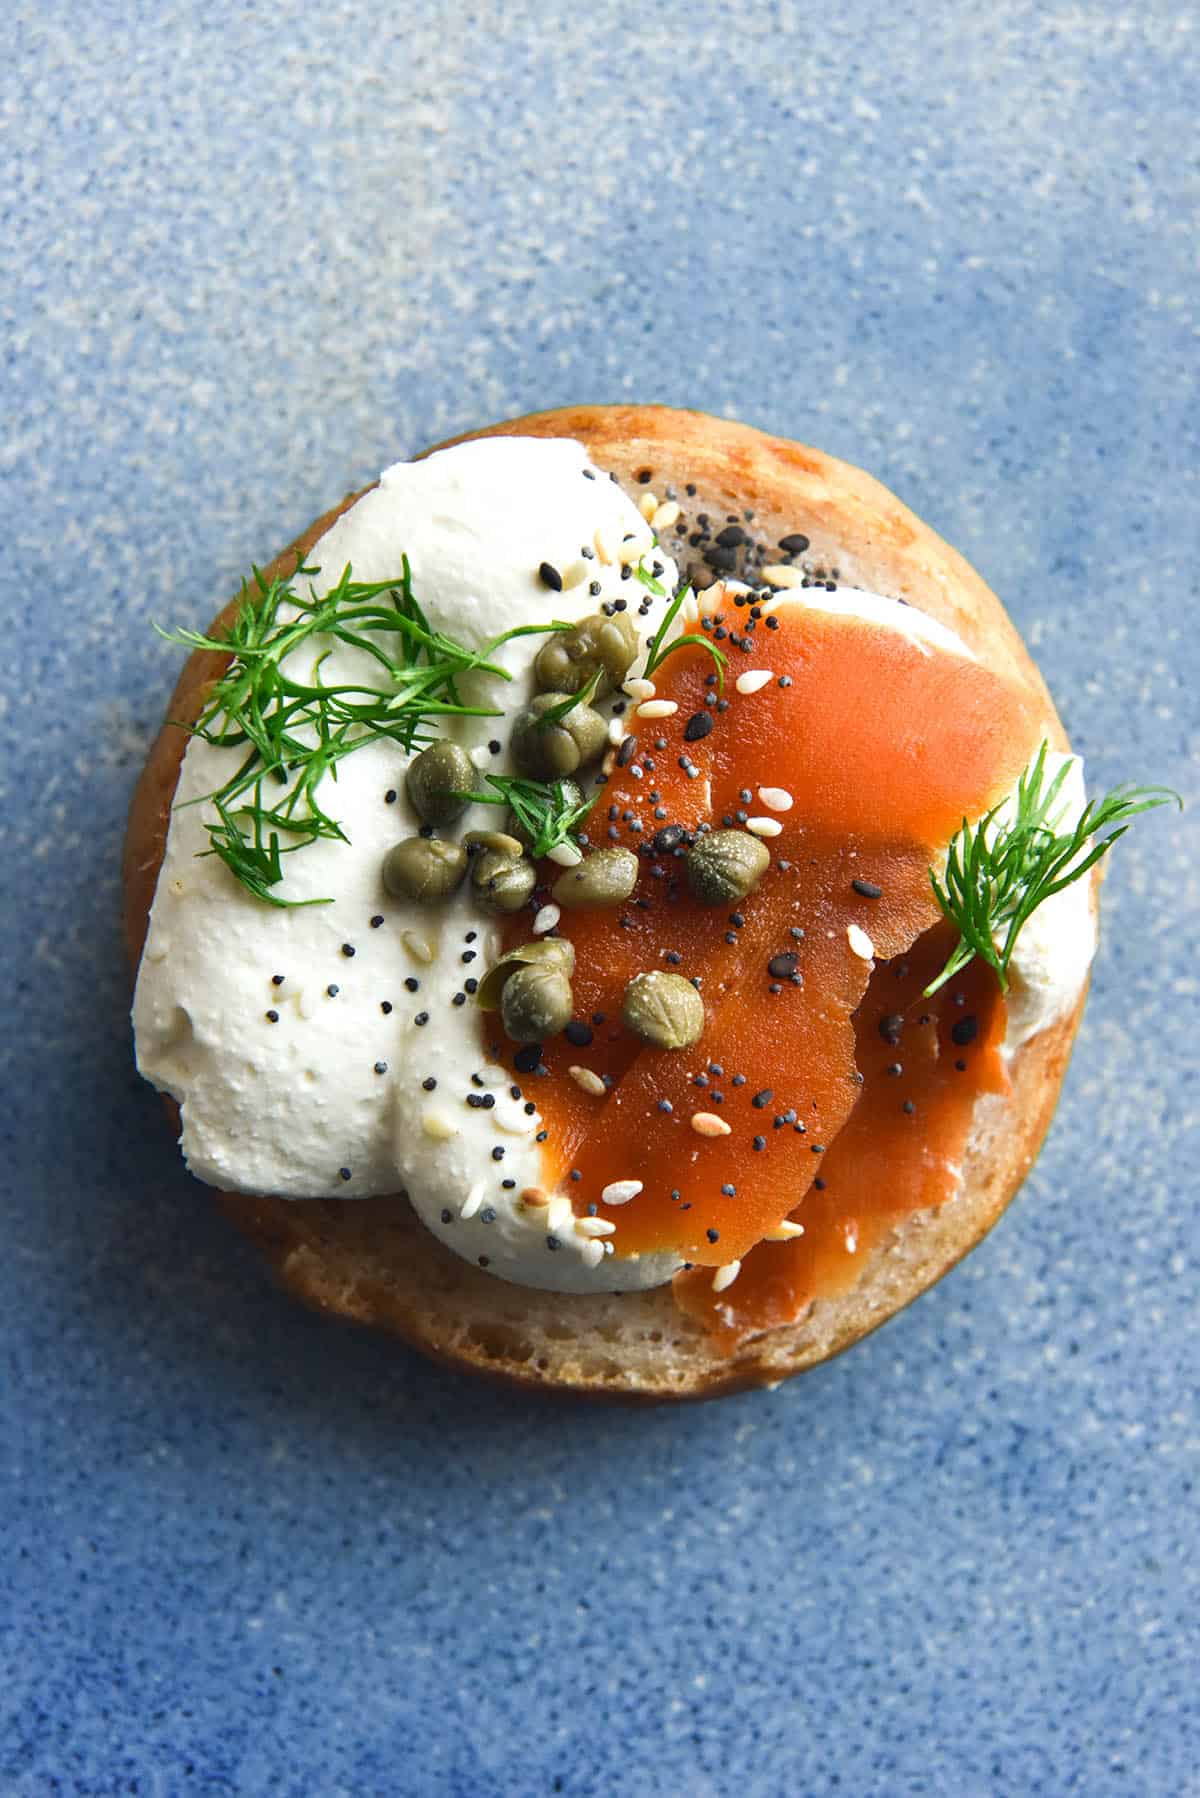 An aerial view of a gluten free bagel half atop a sky blue ceramic plate. The bagel is topped with whipped lactose free mascarpone, easy carrot lox, capers and dill, along with a sprinkle of FODMAP friendly everything bagel seasoning.